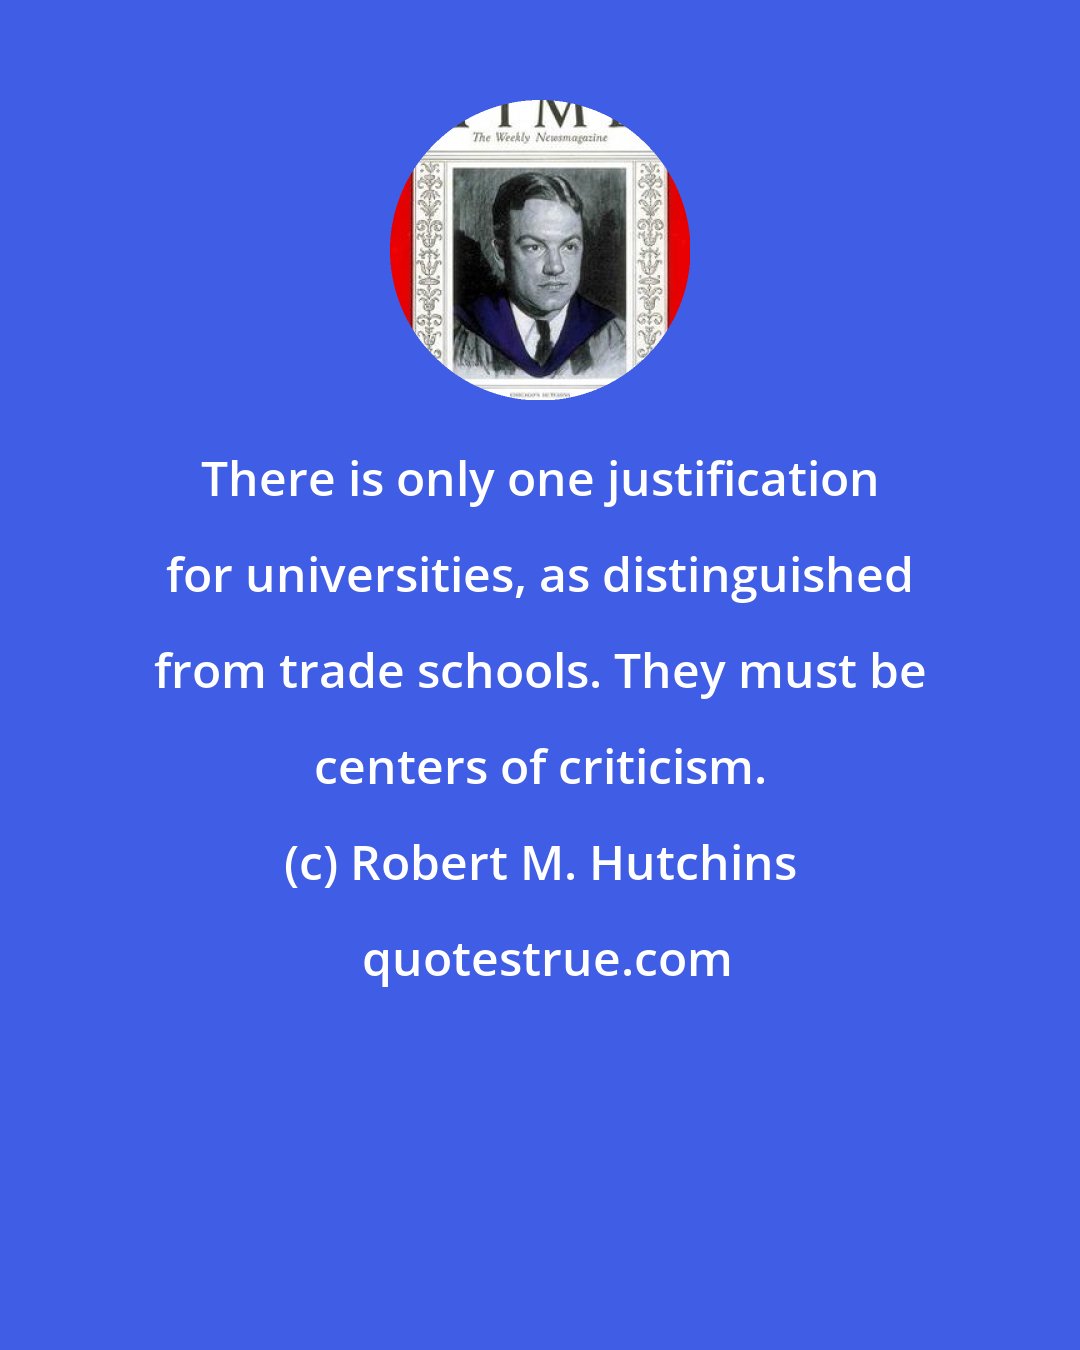 Robert M. Hutchins: There is only one justification for universities, as distinguished from trade schools. They must be centers of criticism.